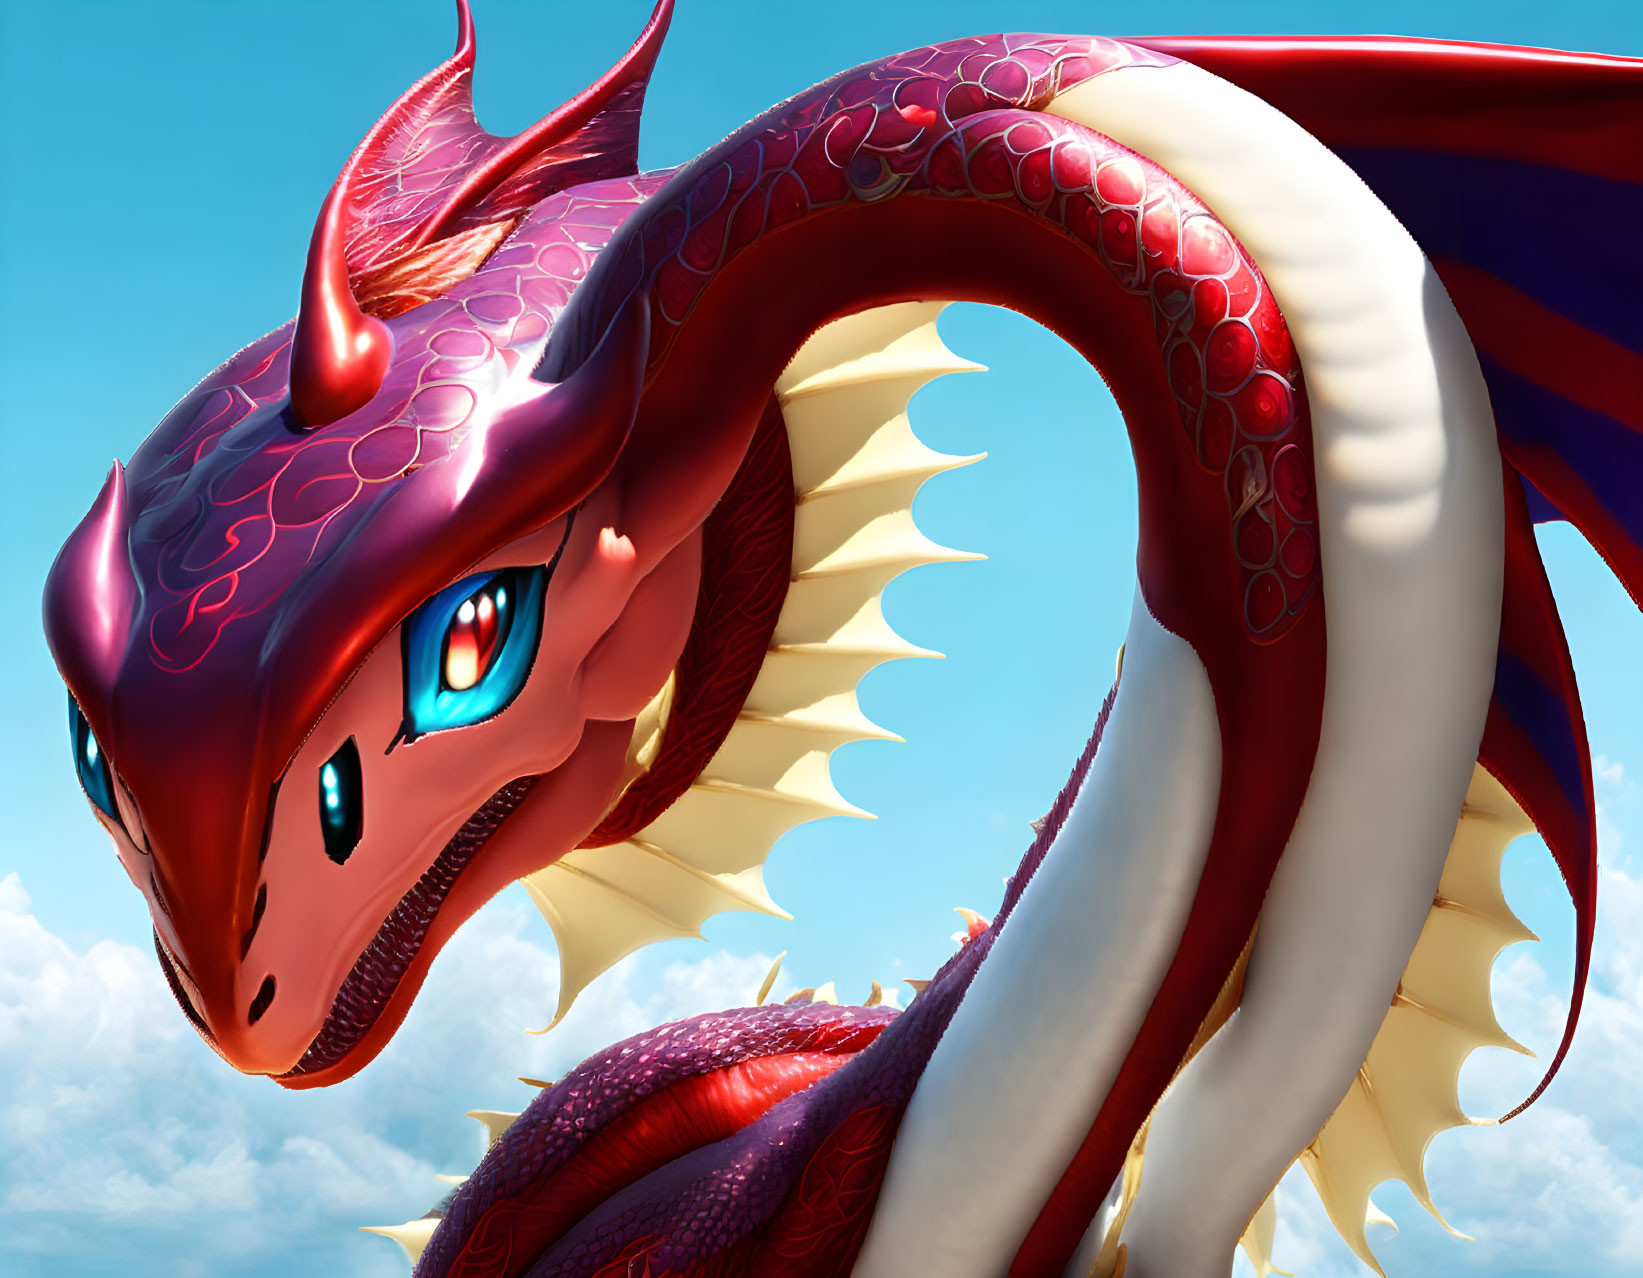 Colorful Red Dragon with Blue Eyes and White Underbelly in Clear Blue Sky